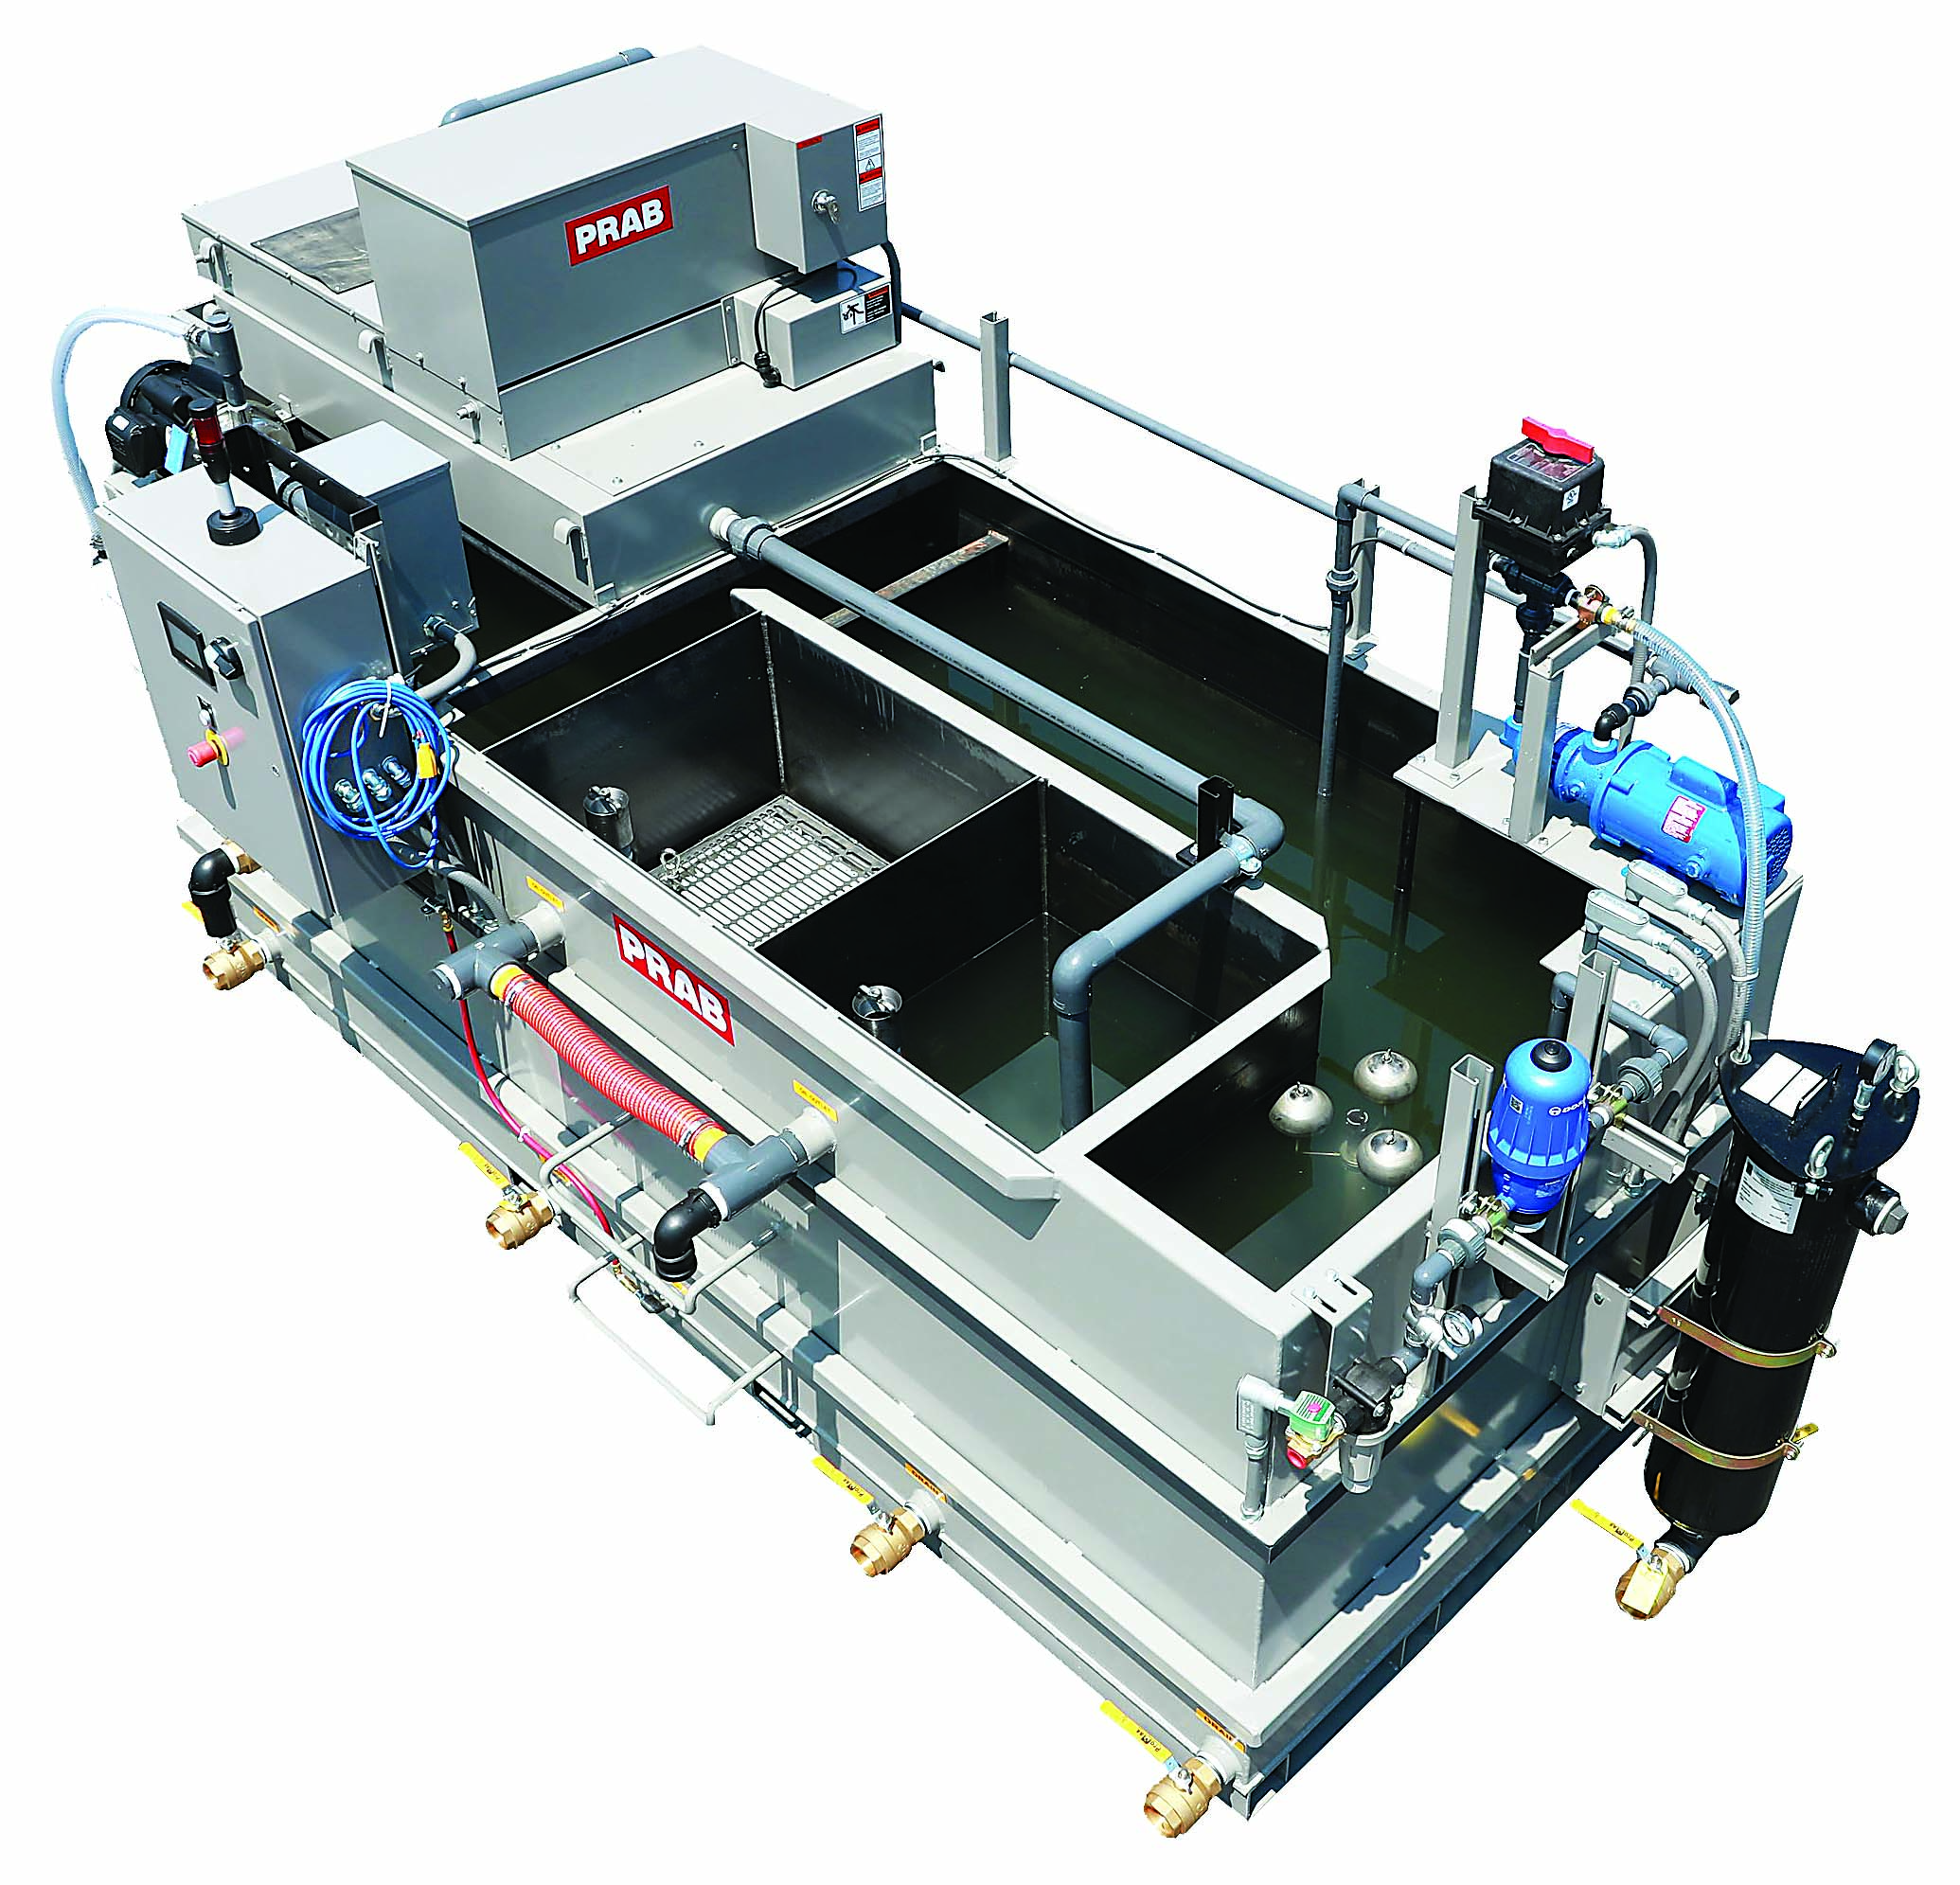 The Guardian is a turnkey fluid recycling system designed for easy installation and operation. Image courtesy of Prab